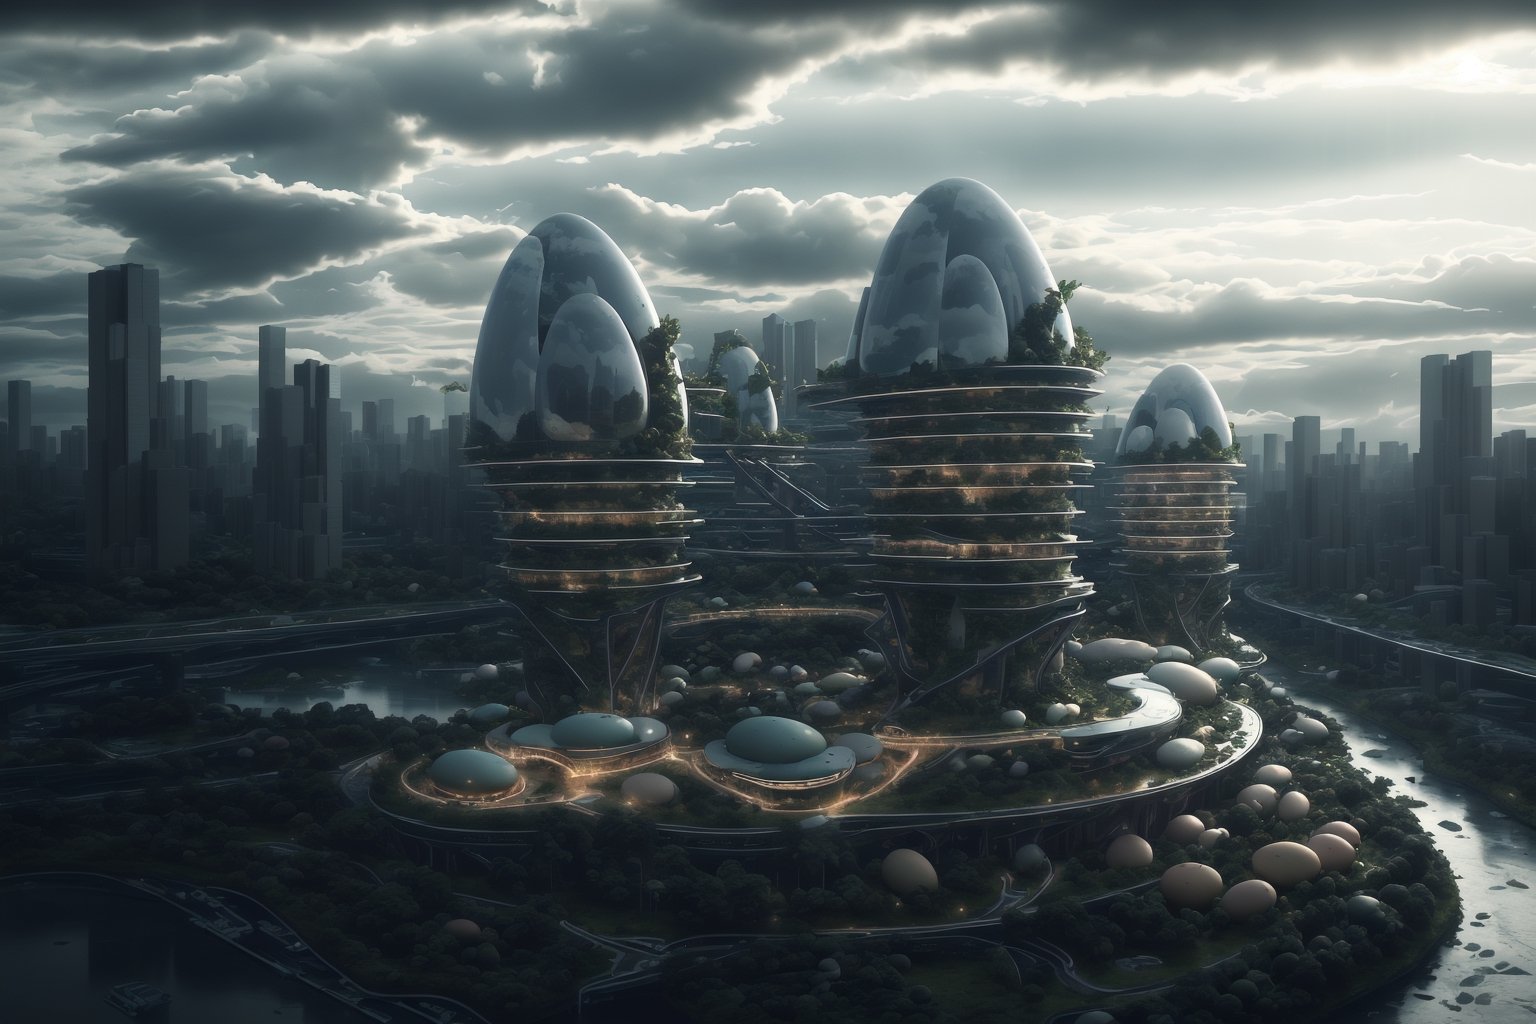 bright_daylight,
((dark_clouds)),


futuristic_city,
science_fiction_scene,
space_ships,
((close-up_of_a_single_energy-efficient_building_shaped_like_an_easter_egg)),
organically_shaped_buildings,
jungle,
((exotic_plants)),
(river),





photorealistic,
Hyper Realistic,

(masterpiece),
High_resolution, very_detailed, sharp_focus, 8k.,SD 1.5,
bird 's-eye view